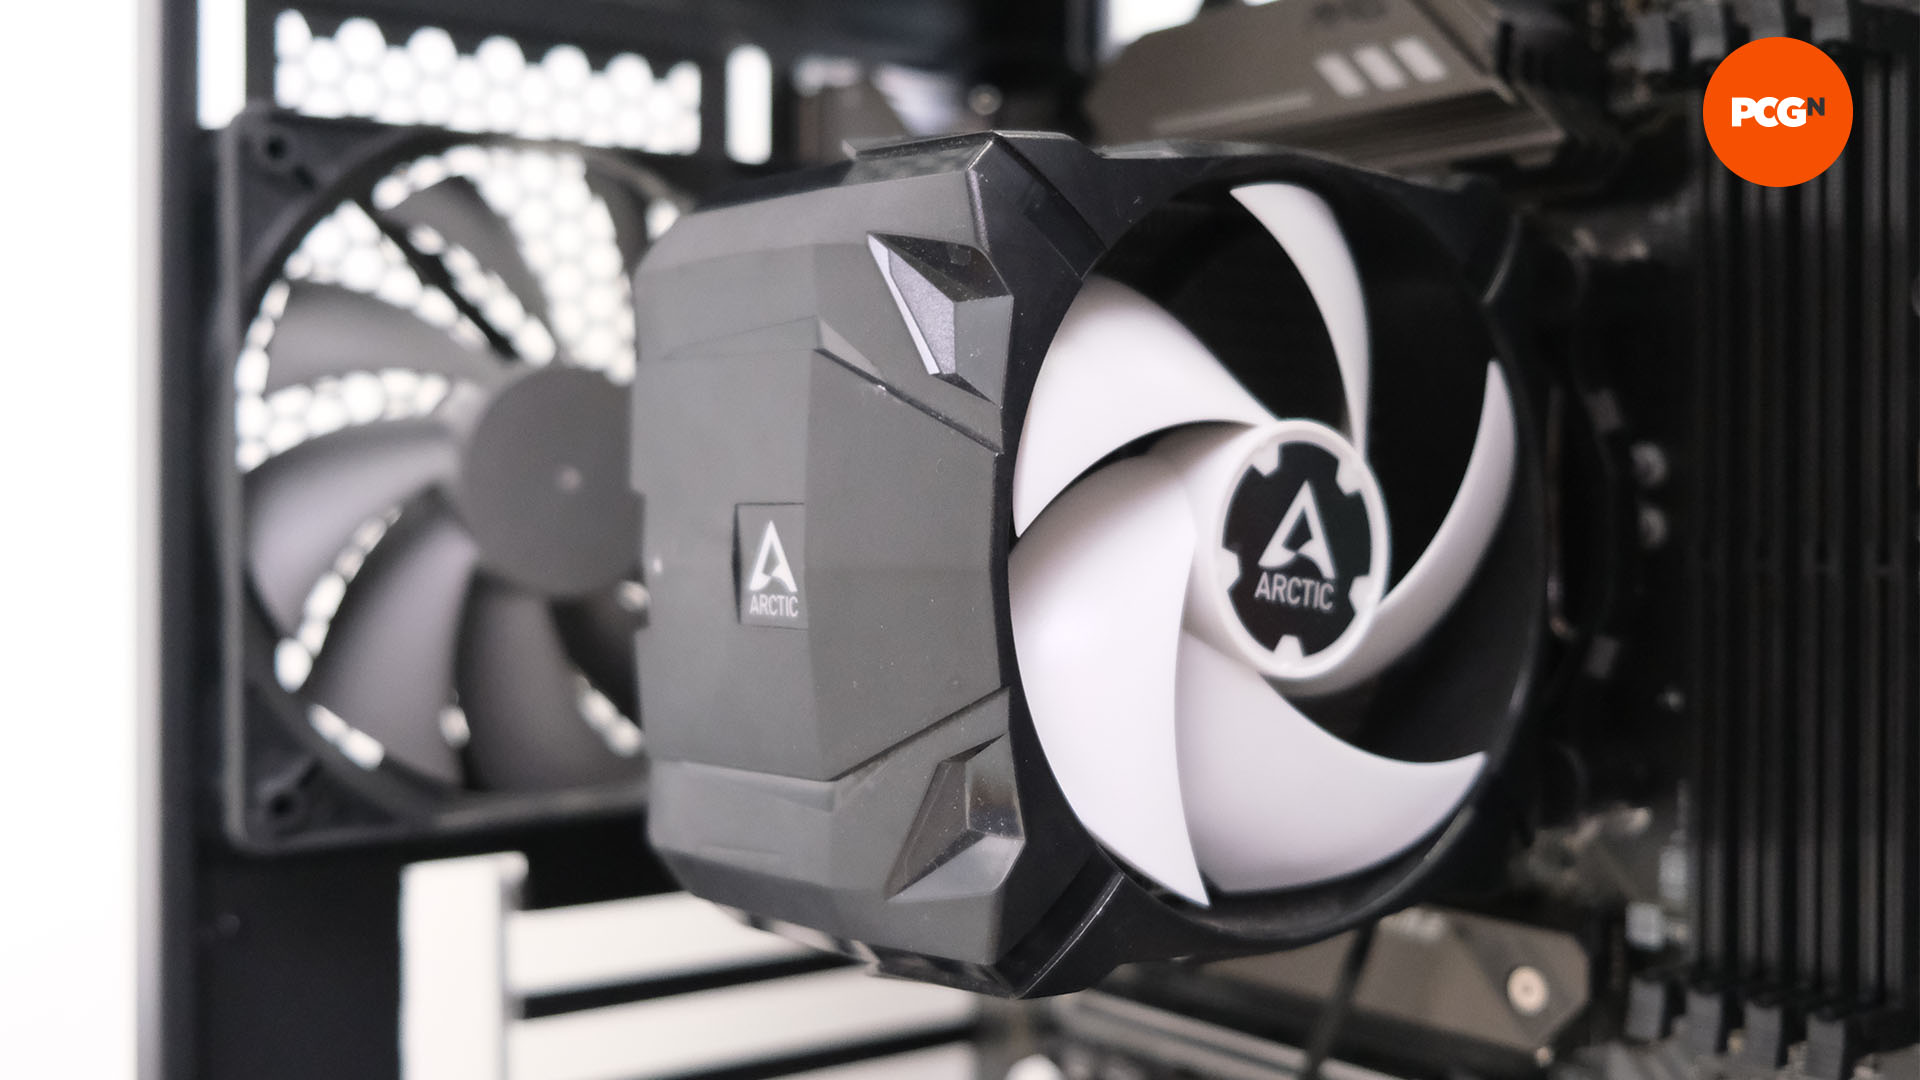 How to build a gaming PC: Install extra fans